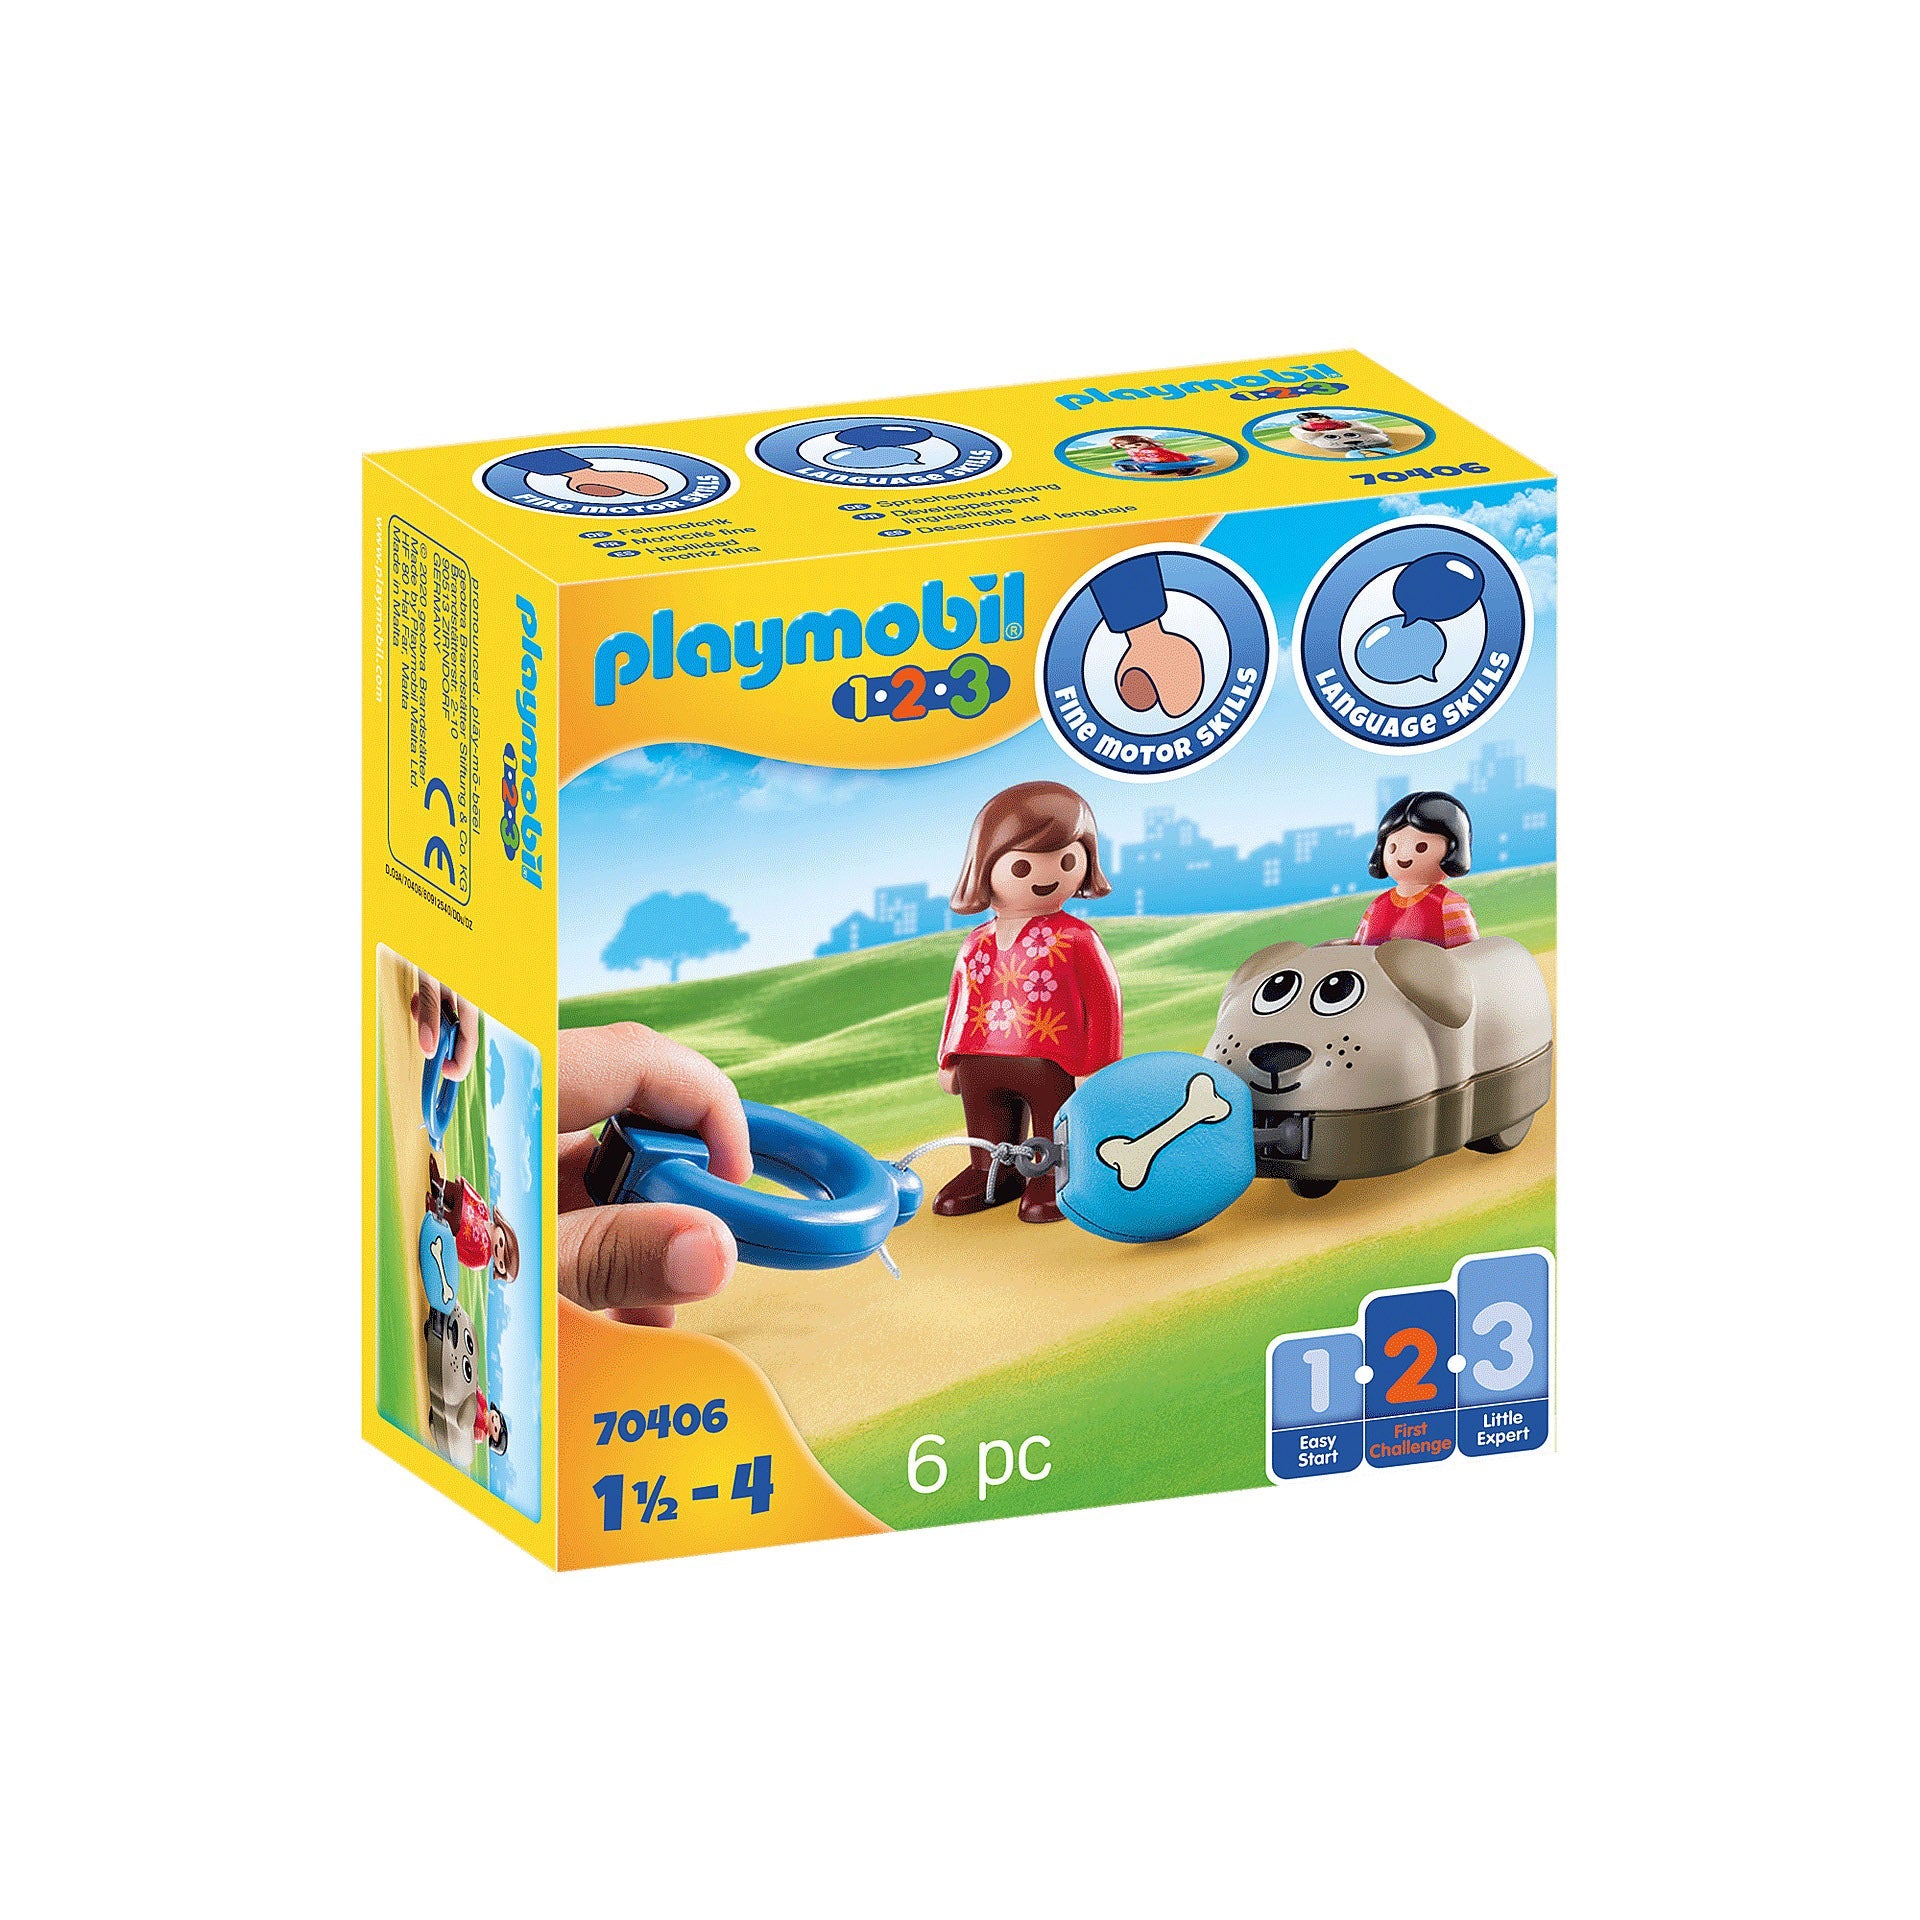 PLAYMOBIL Space 9489 Mars Research Vehicle, For children ages 6